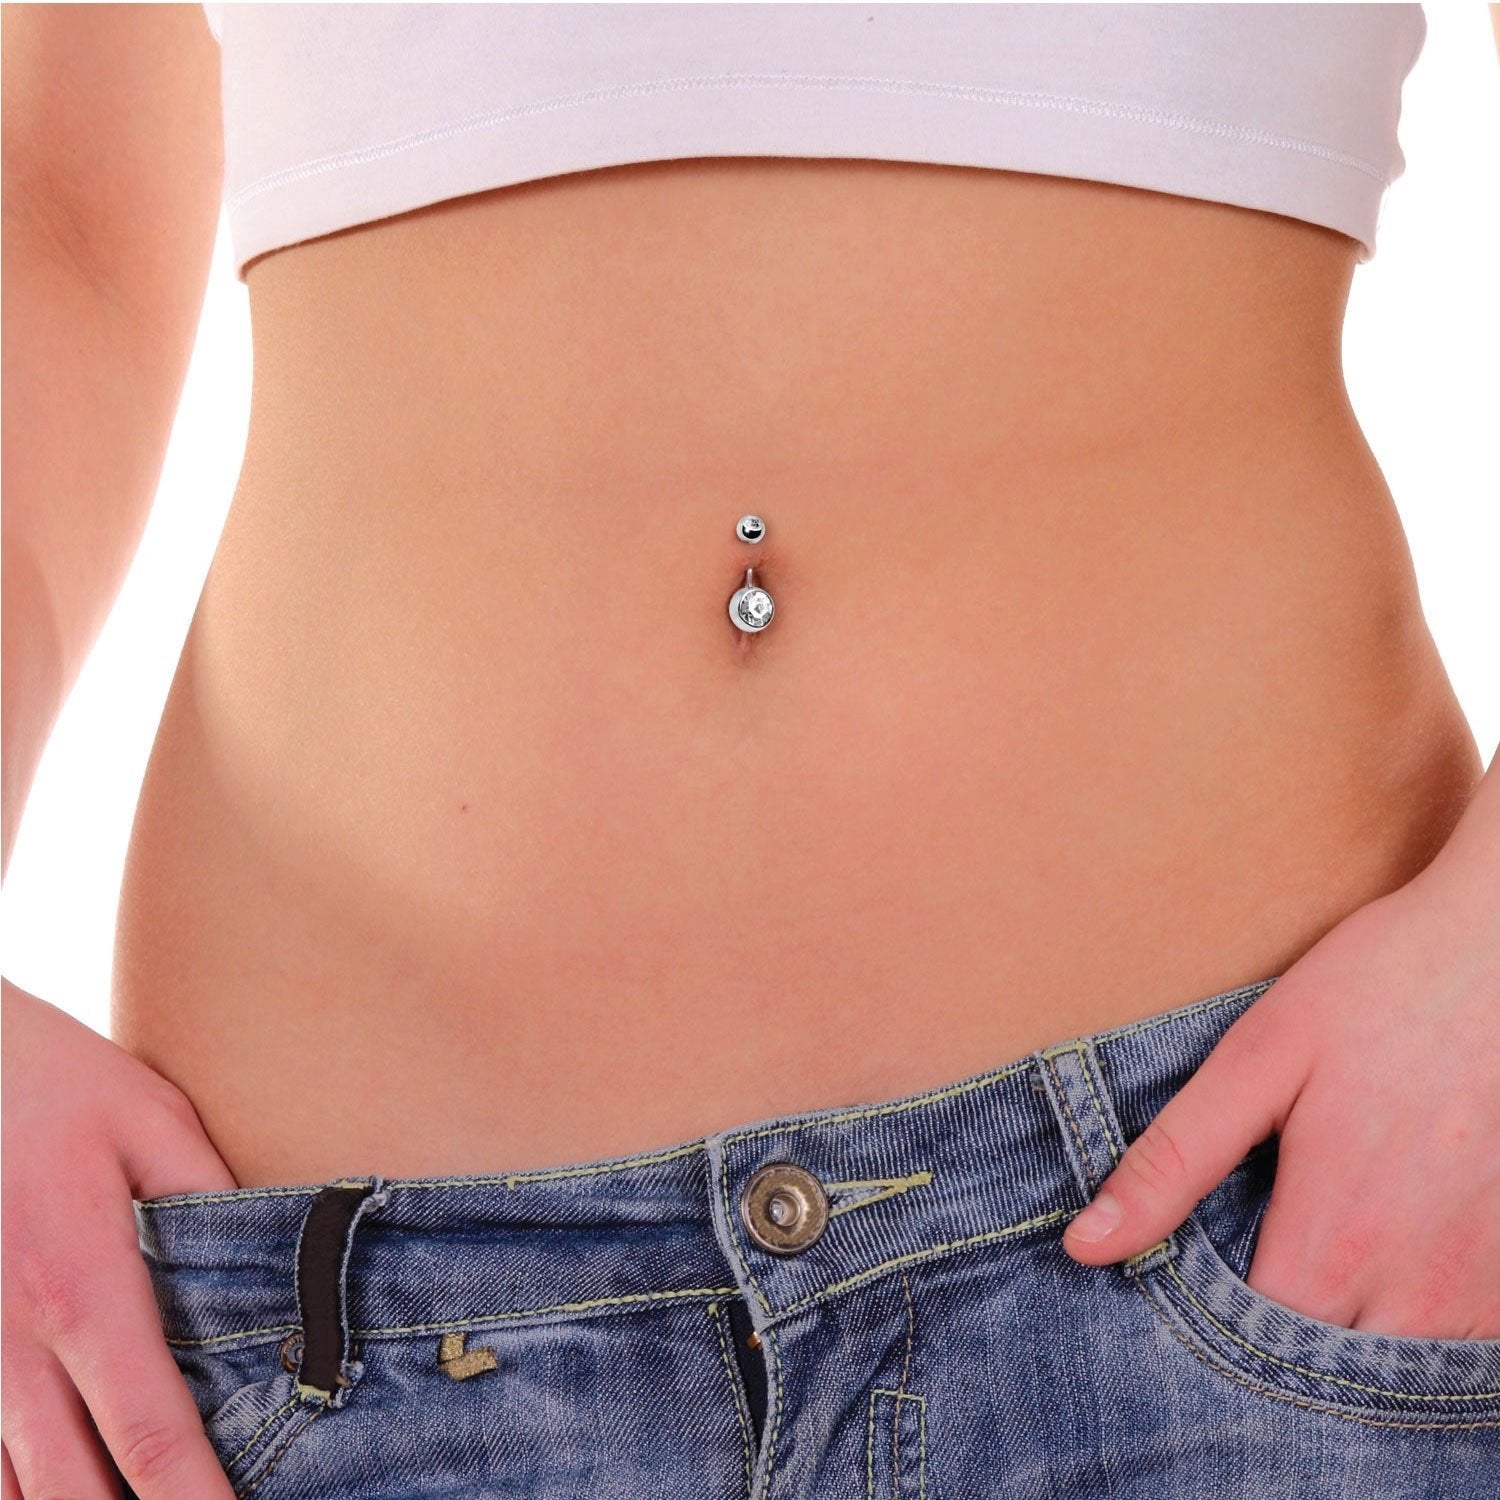 12PCS Belly Button Rings 316L Surgical Steel 14G CZ Navel Rings Barbells  Studs Women Girls Body Piercing Jewelry (Silver/Pink) - China Body Piercing  Jewelry and Body Jewelry Sets price